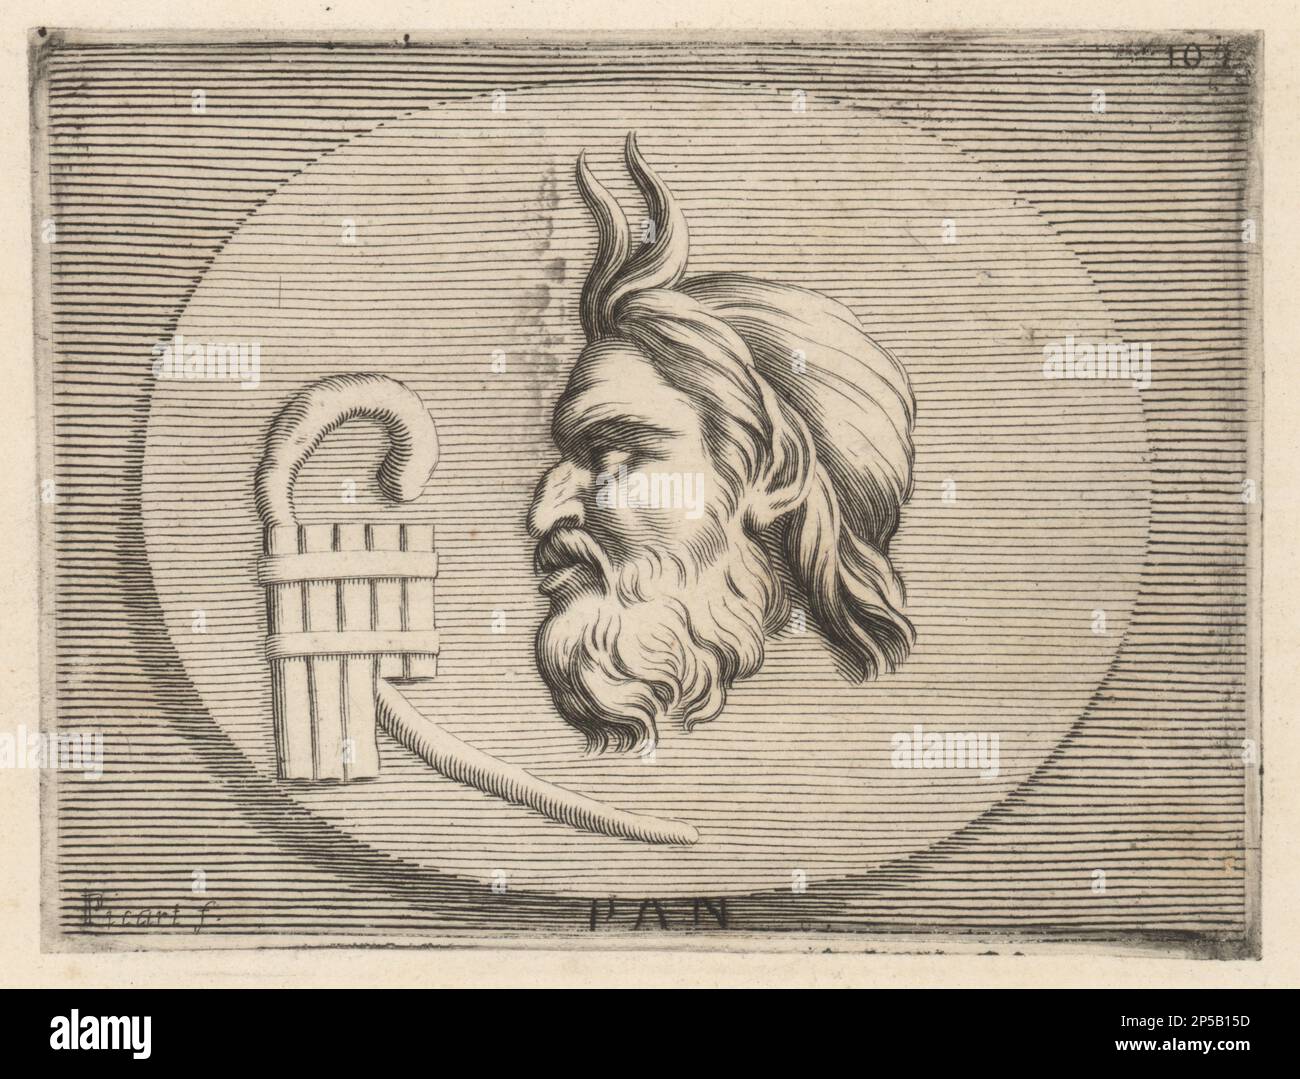 Head of the Greek god of the wild, Pan, with the syrinx or pan flute. Bust of a bearded male with goat's horns on his forehead. Pan con la siringa. Copperplate engraving by Etienne Picart after Giovanni Angelo Canini from Iconografia, cioe disegni d'imagini de famosissimi monarchi, regi, filososi, poeti ed oratori dell' Antichita, Drawings of images of famous monarchs, kings, philosophers, poets and orators of Antiquity, Ignatio de’Lazari, Rome, 1699. Stock Photo